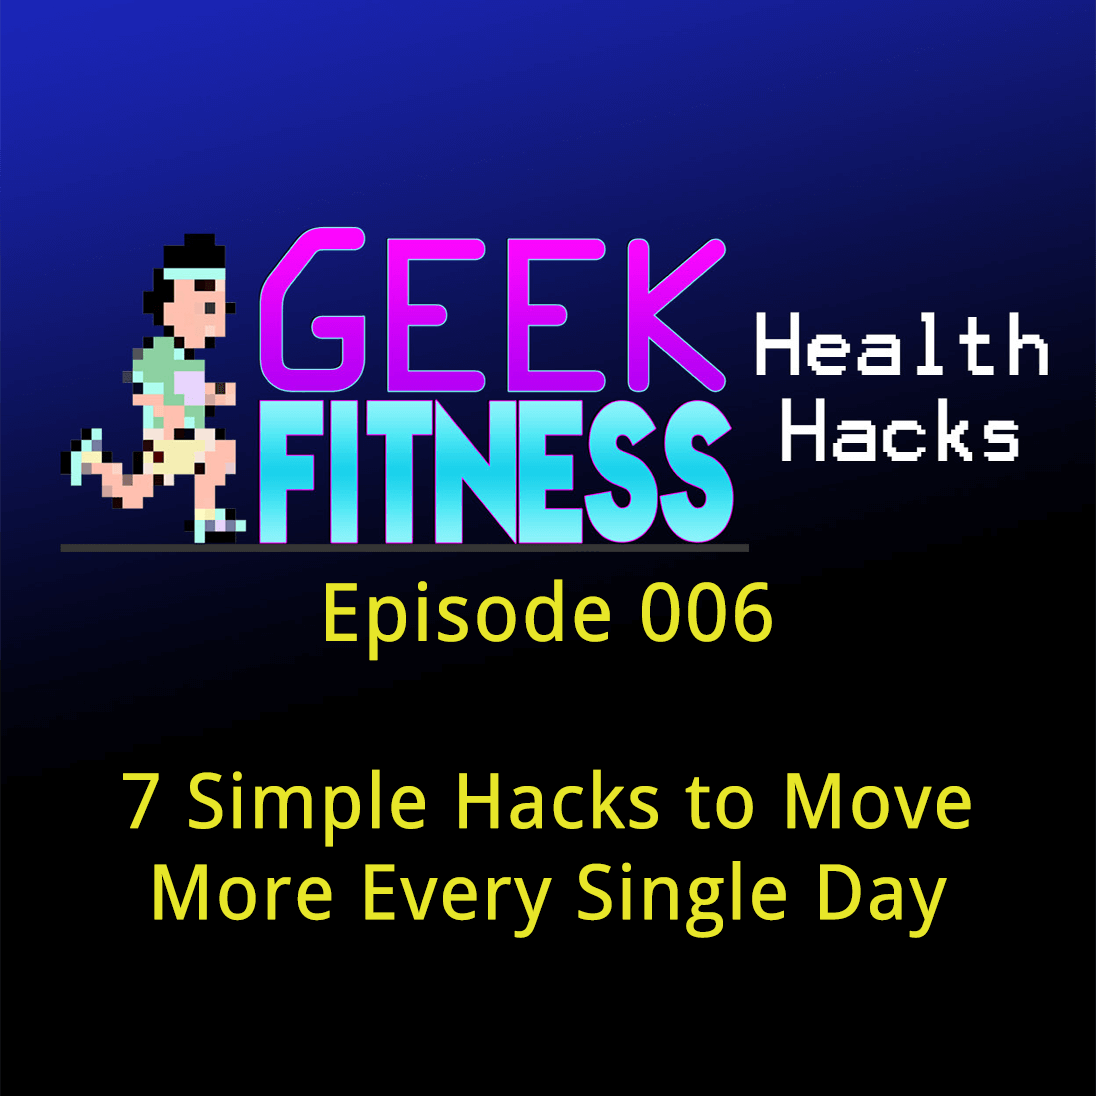 7 Simple Hacks to Move More Every Single Day (Geek Fitness Health Hacks, Episode 006)